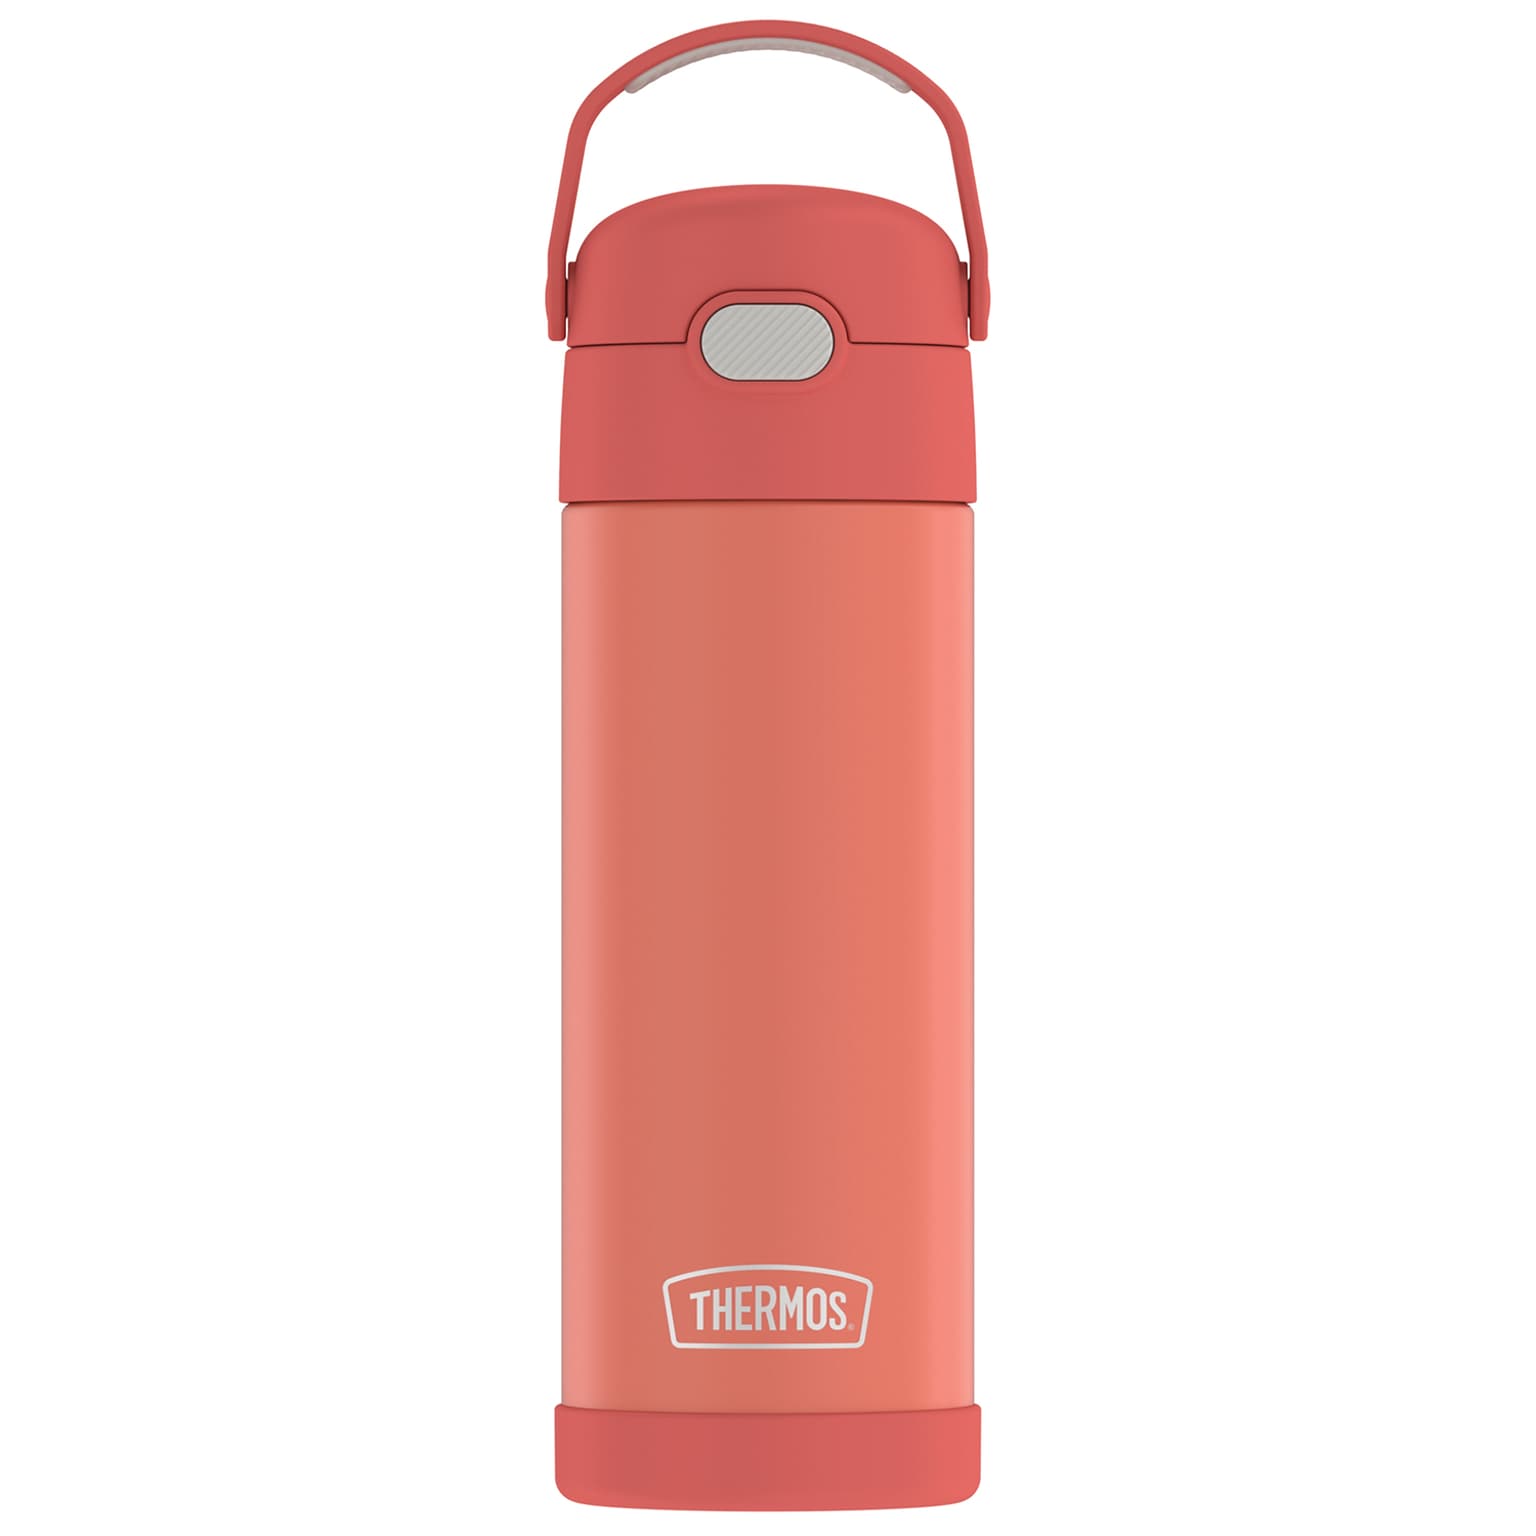 Thermos 16-Ounce FUNtainer Vacuum-Insulated Stainless Steel Bottle with Spout, Apricot (F41101AP6)